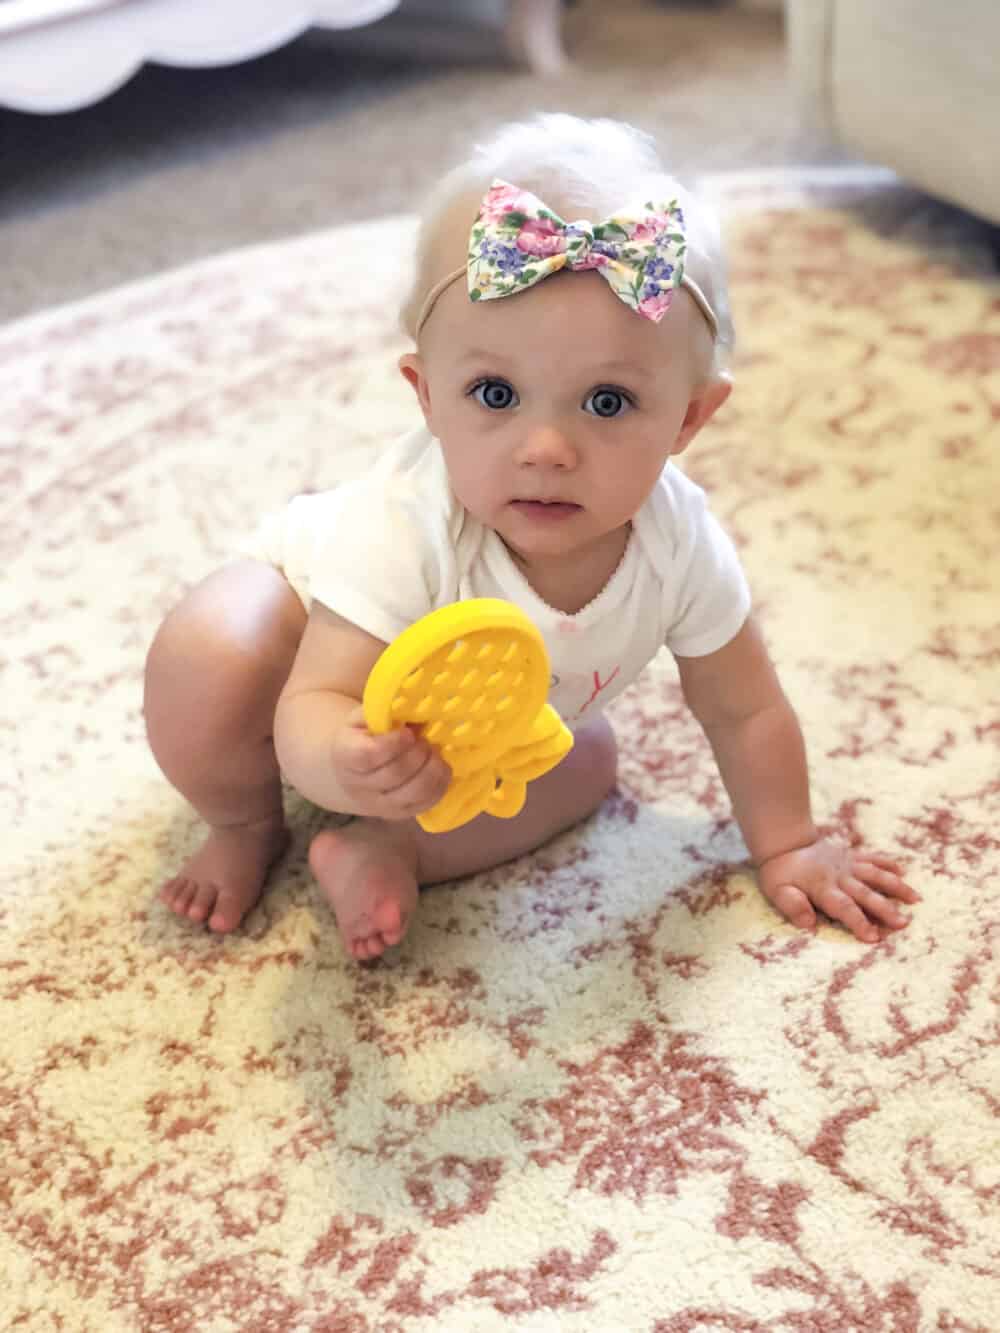 A baby playing with a yellow toy on a rug.